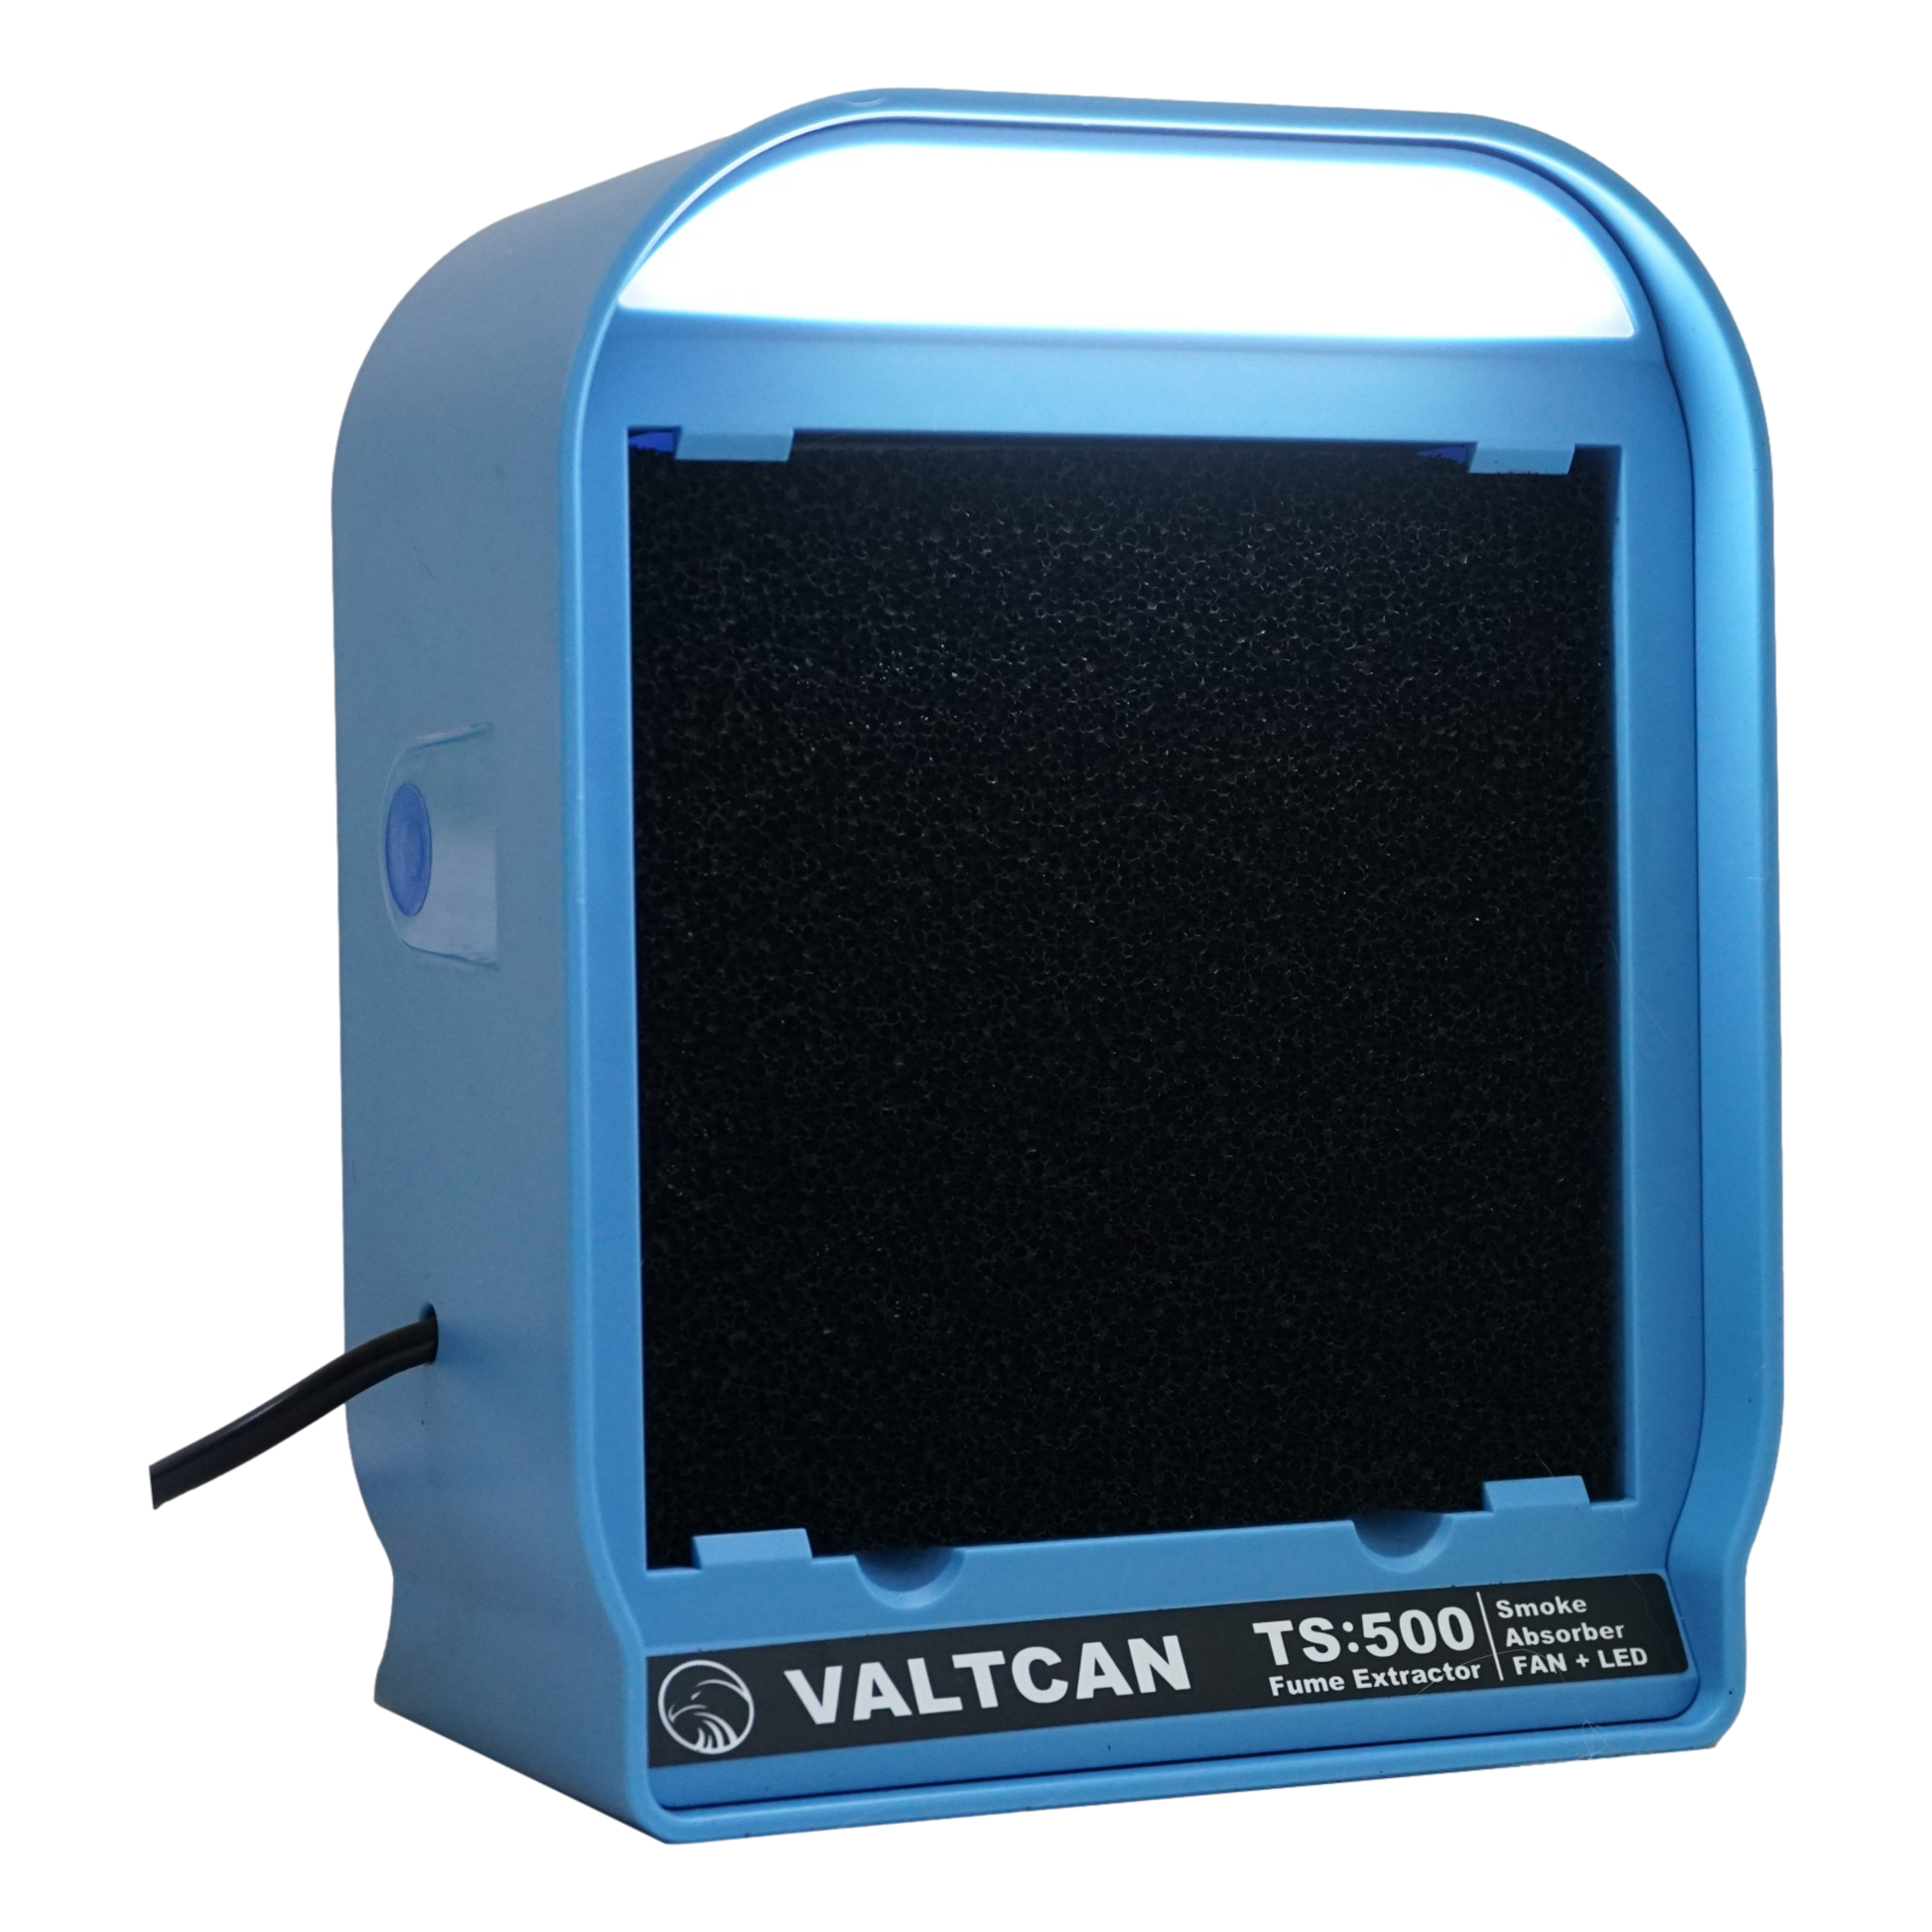 Valtcan TS:500 Fume Extractor Fan Smoke with